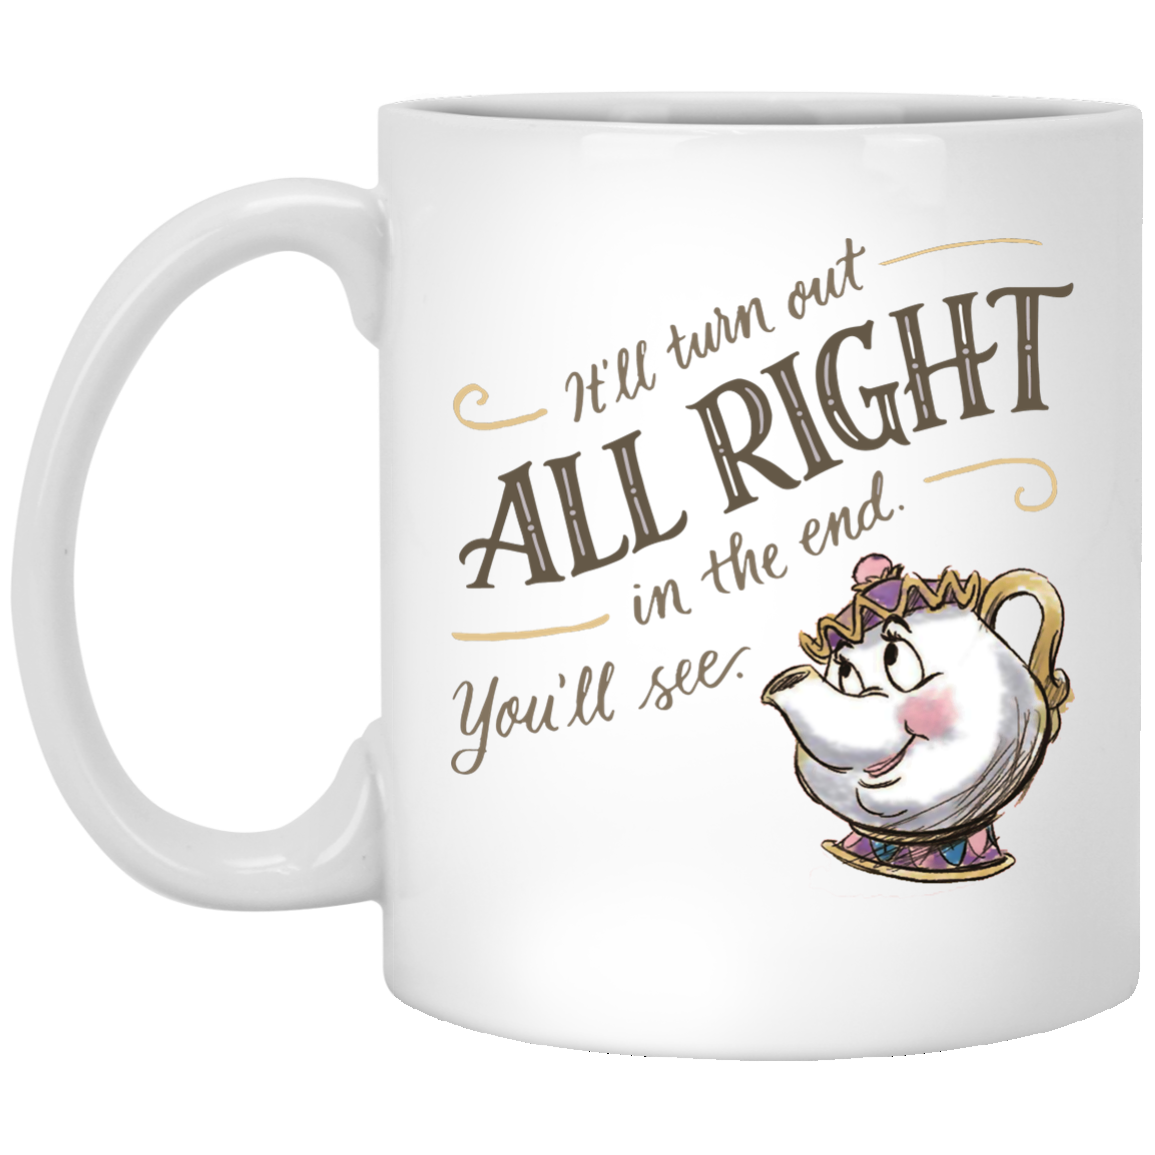 Beauty and The Beast: It'll turn out alright in the end mug